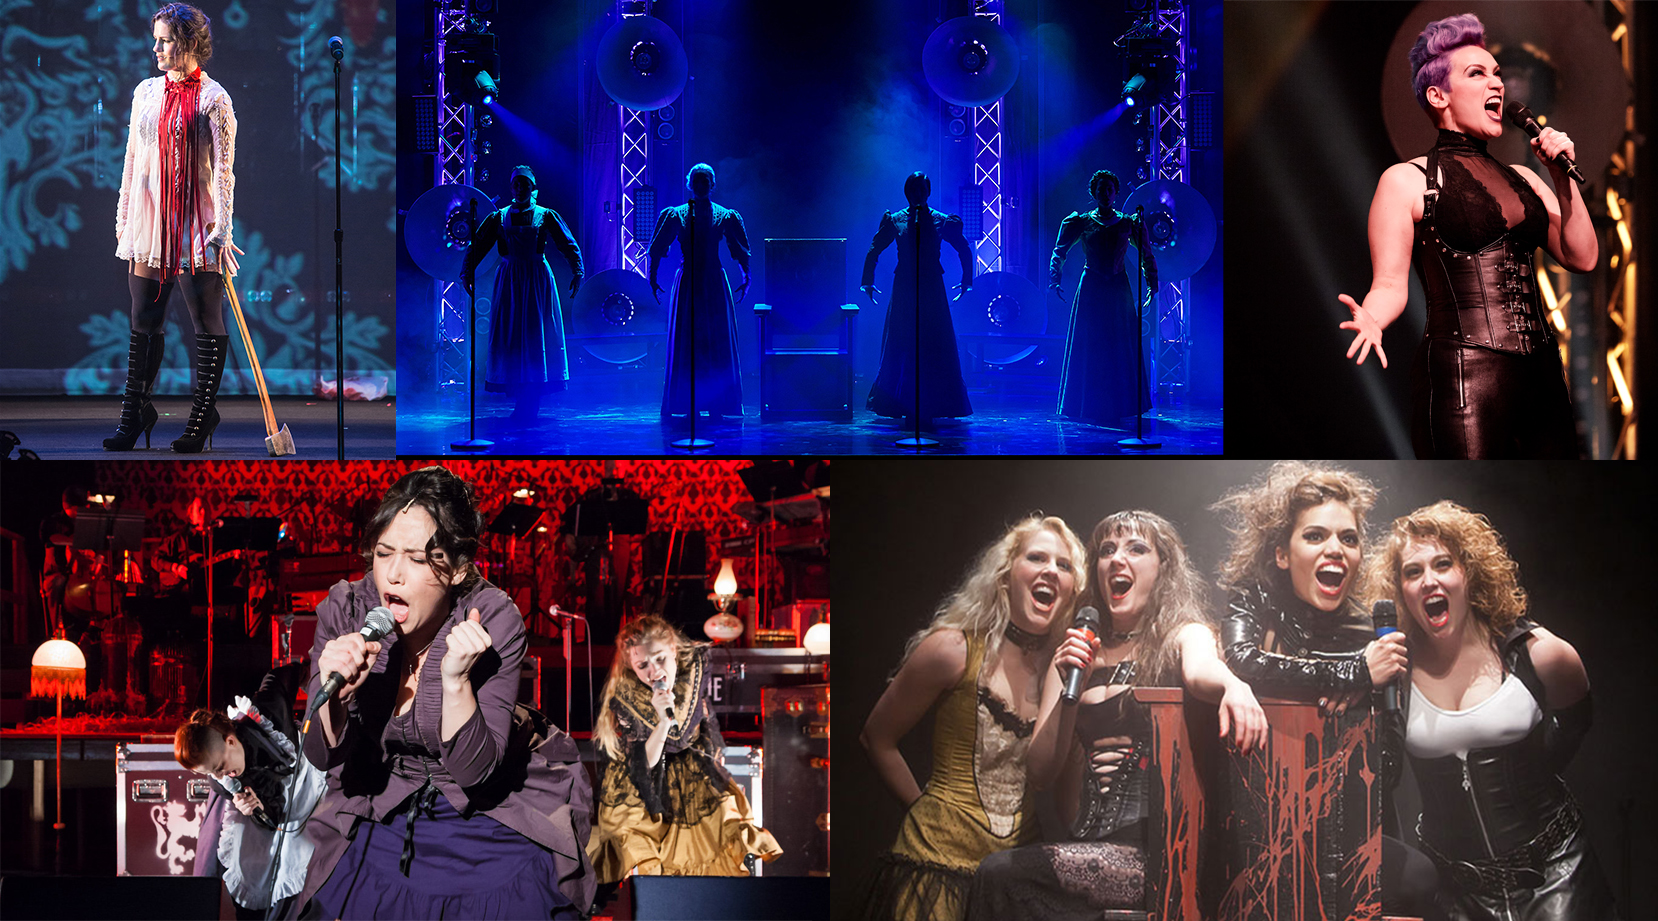 More than 85% of shows featured in the Festival of New Musicals have gone on to subsequent readings, workshops, productions and tours, been licensed, and/or recorded on cast albums.